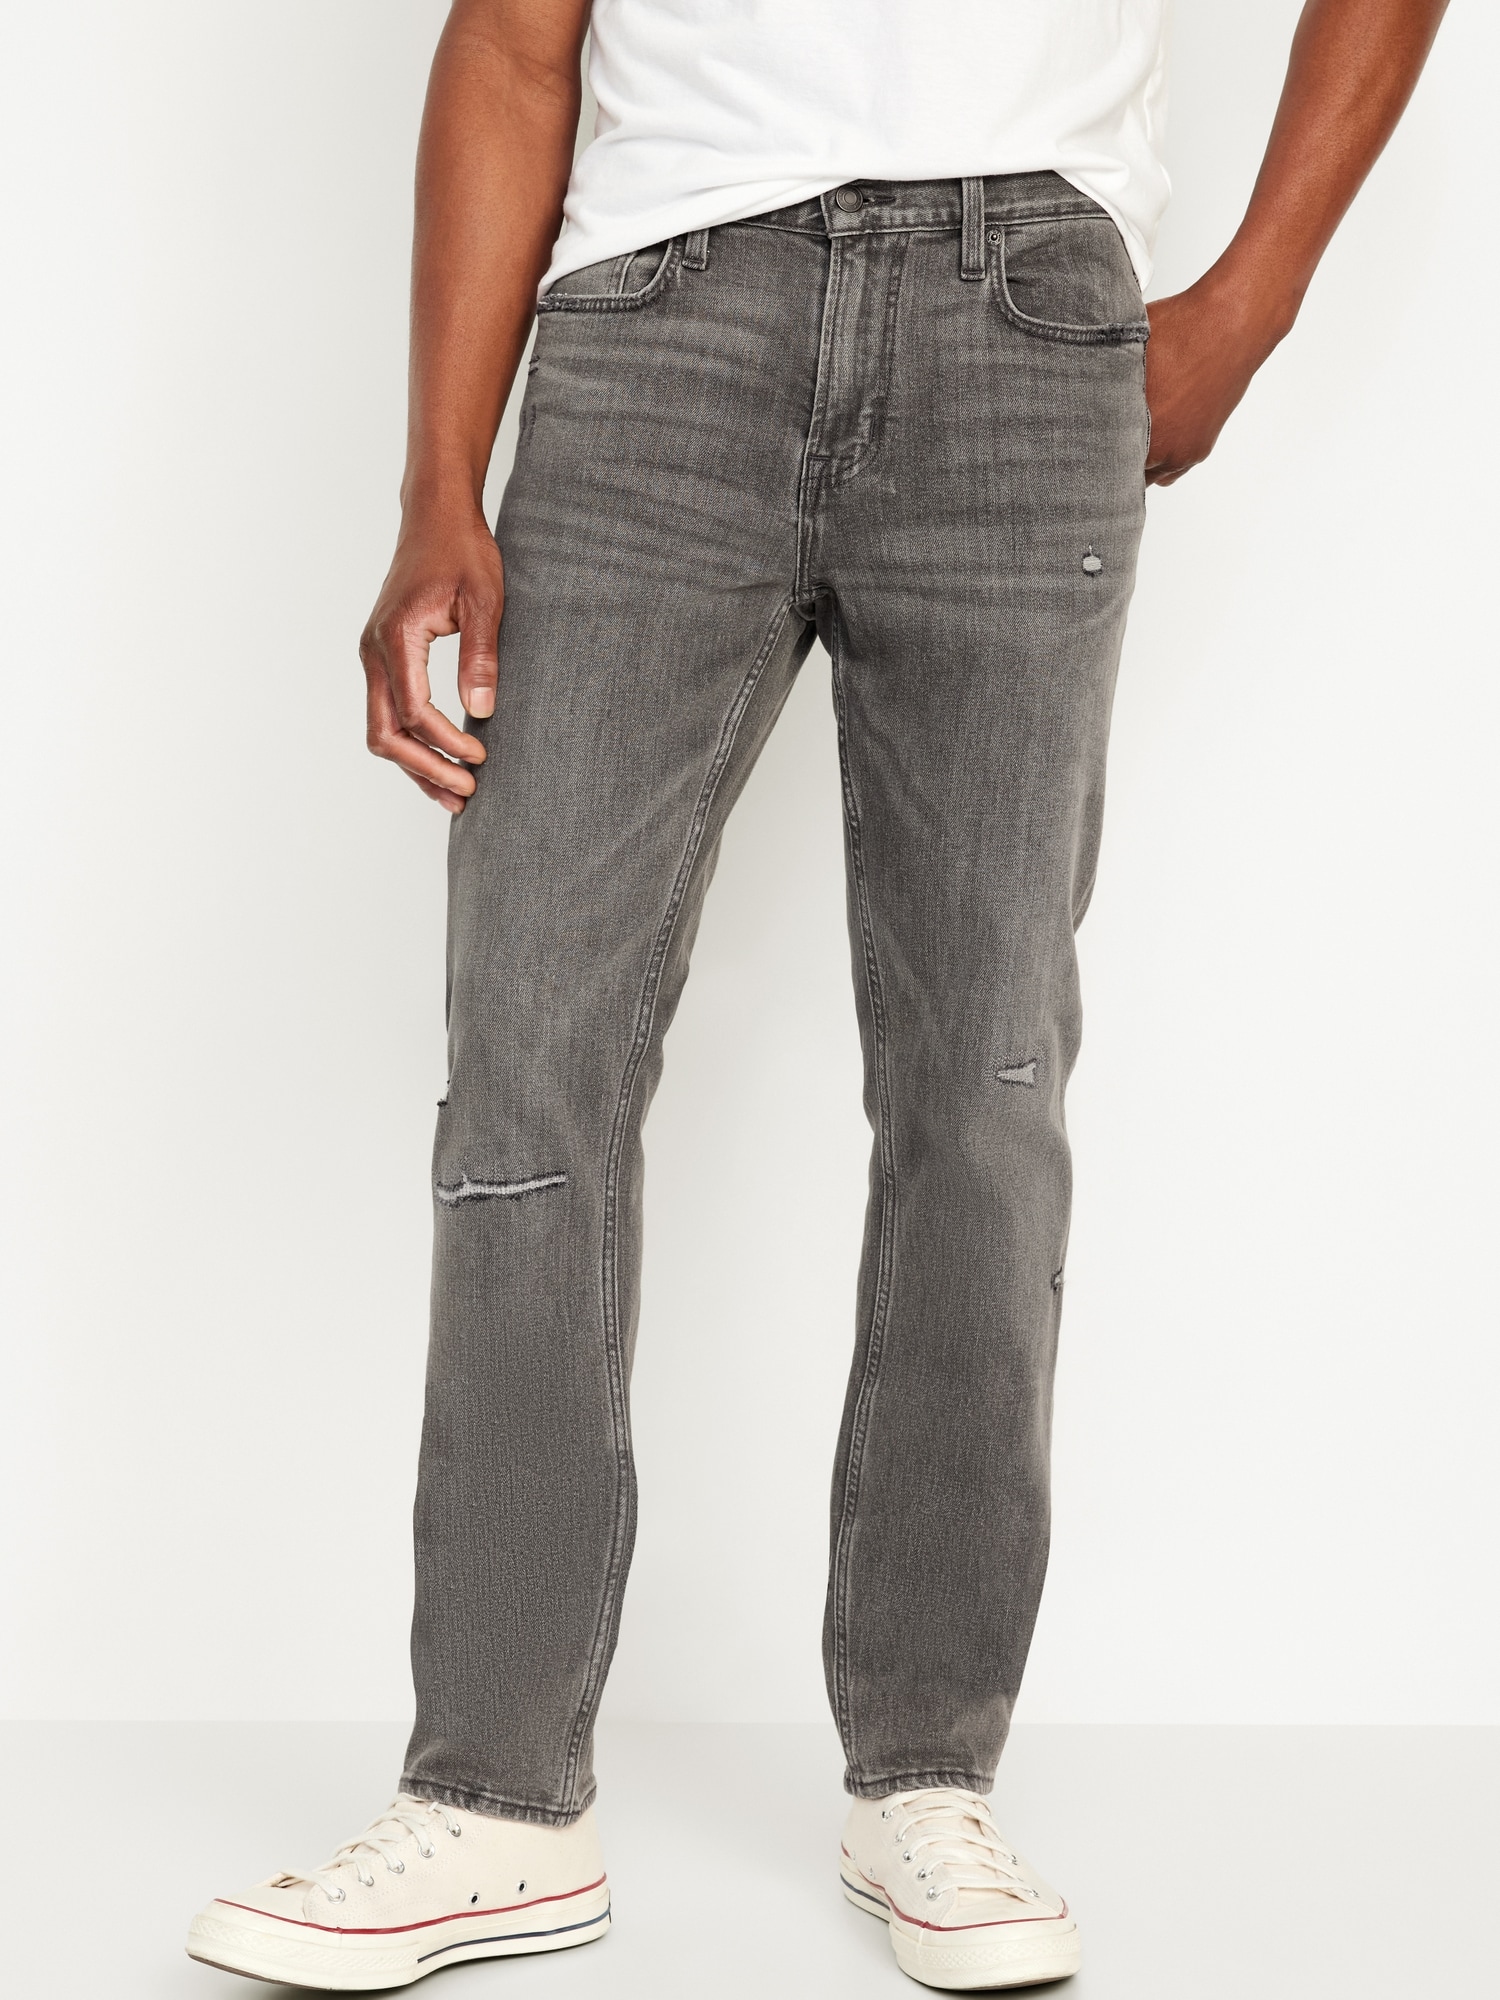 Slim Built-In Flex Ripped Gray Jeans